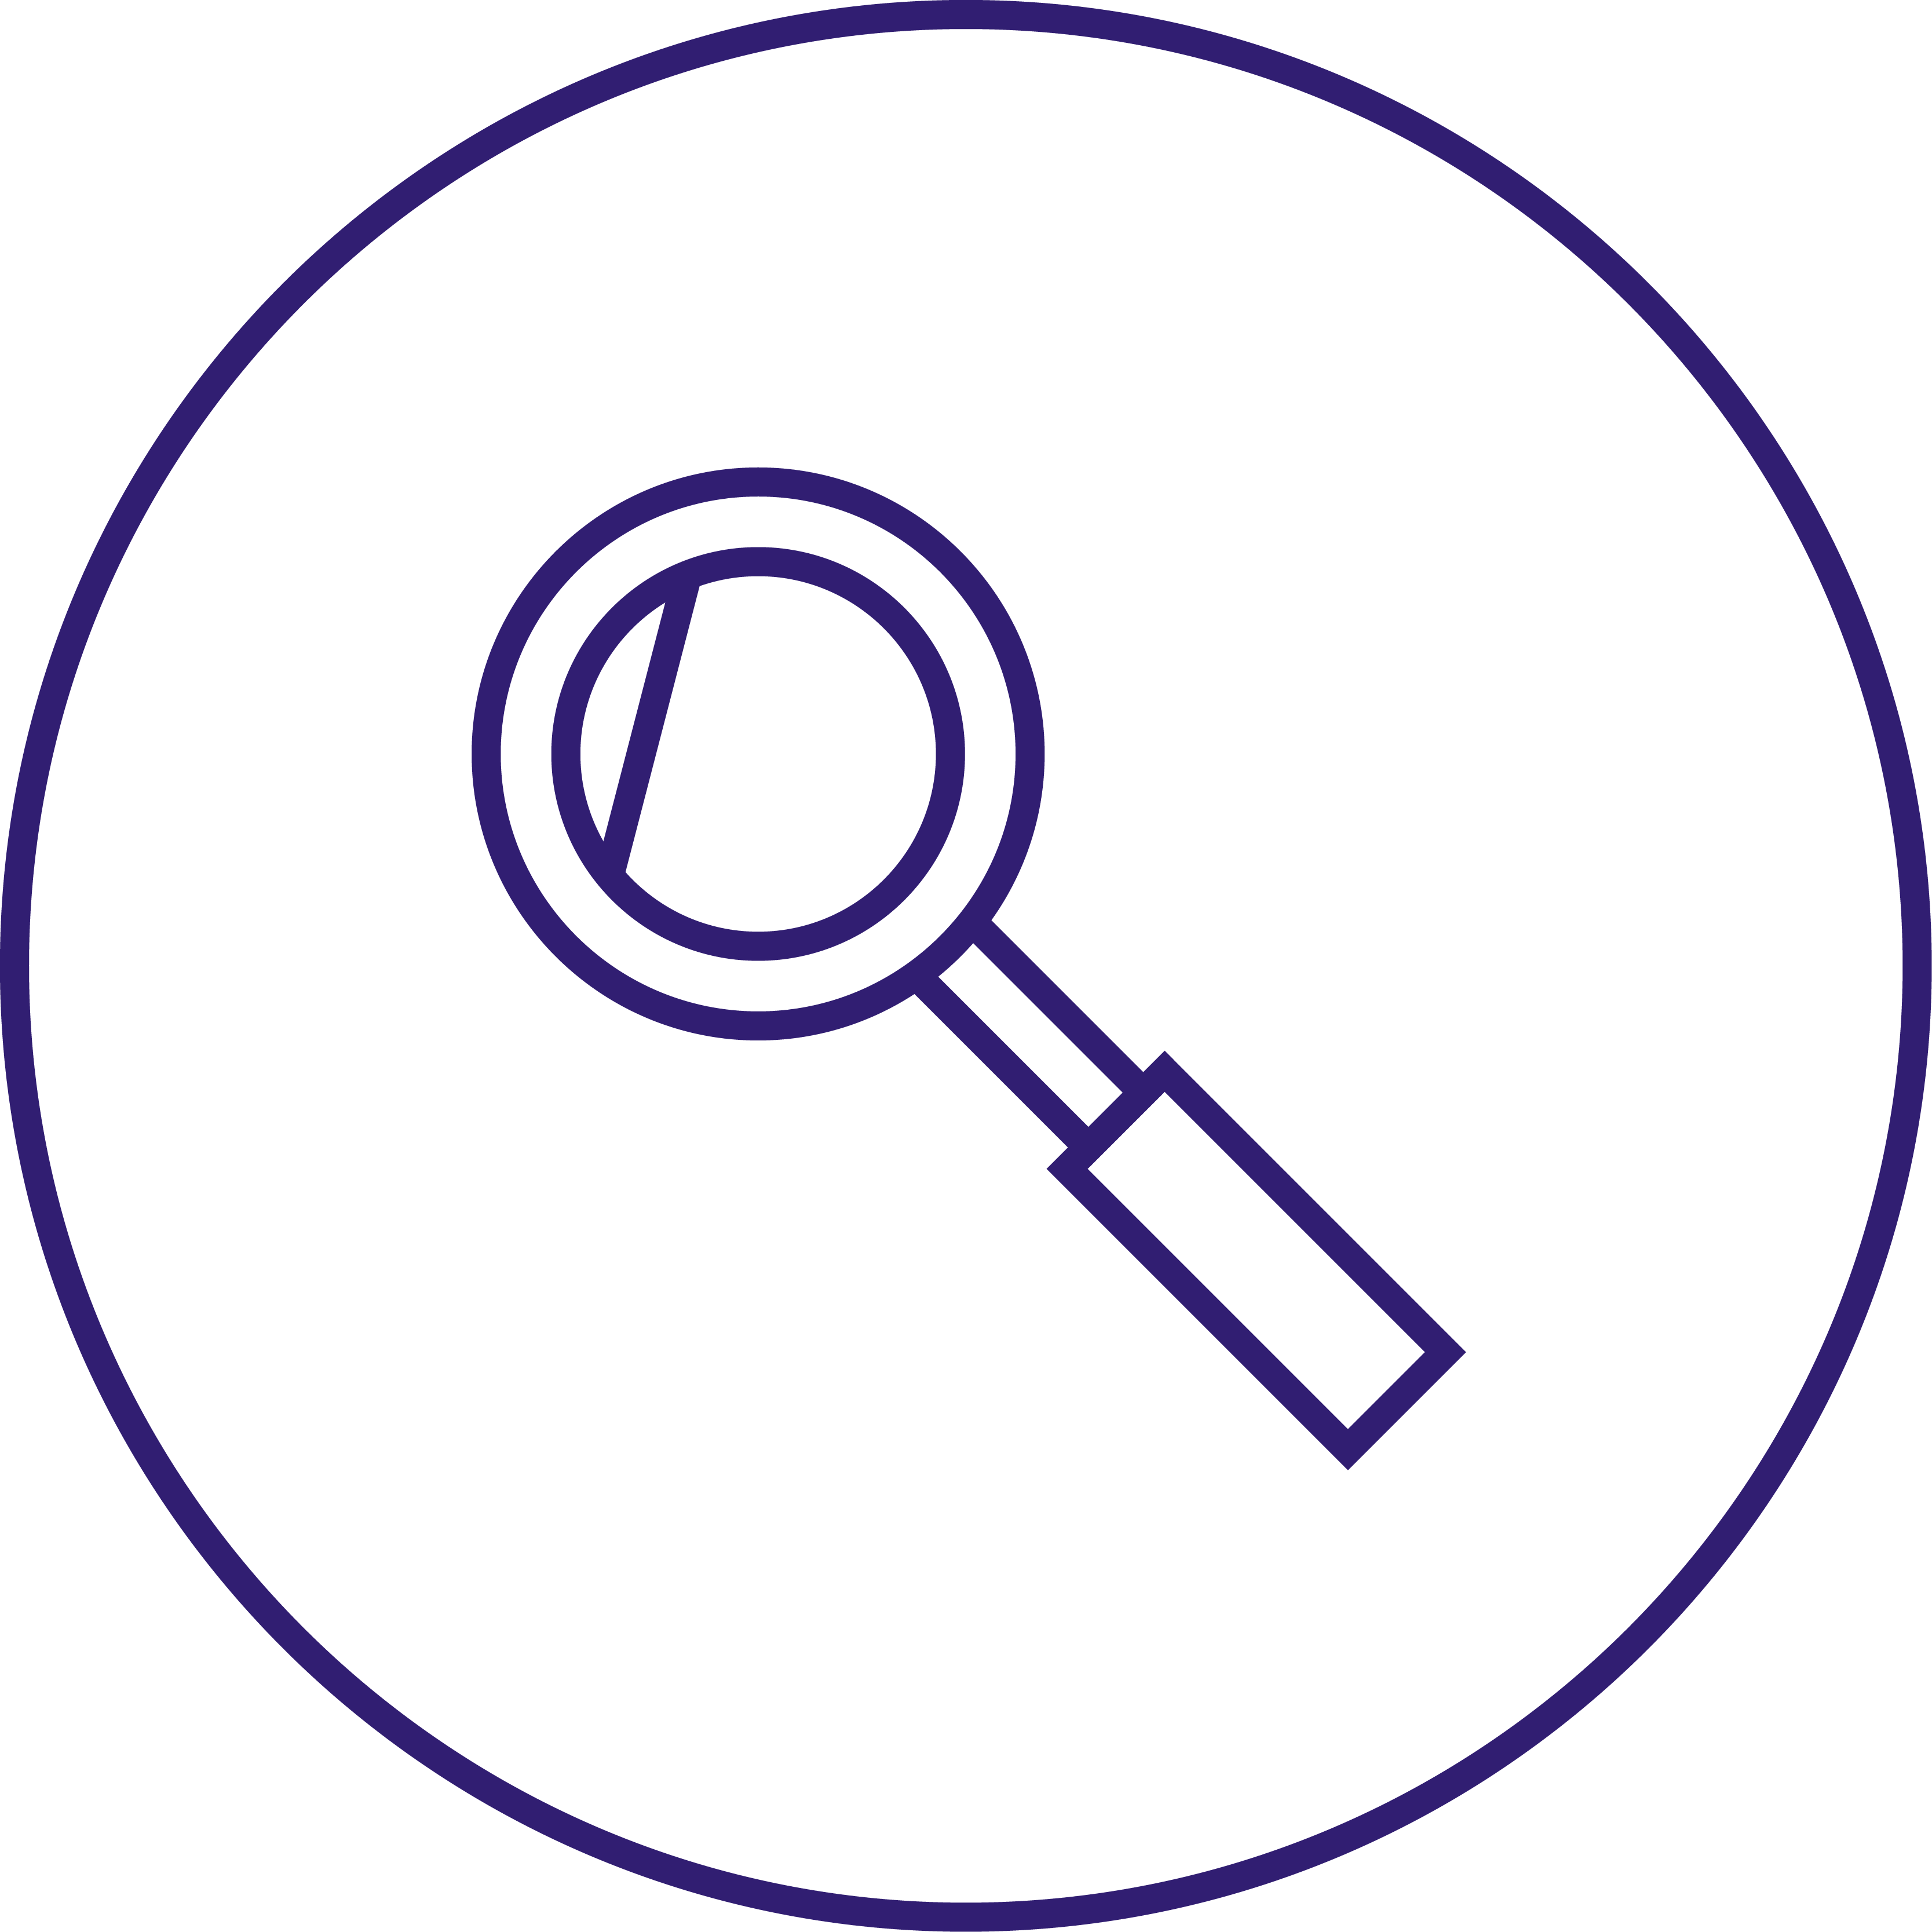 icon containing a magnifying glass inside a purple circle